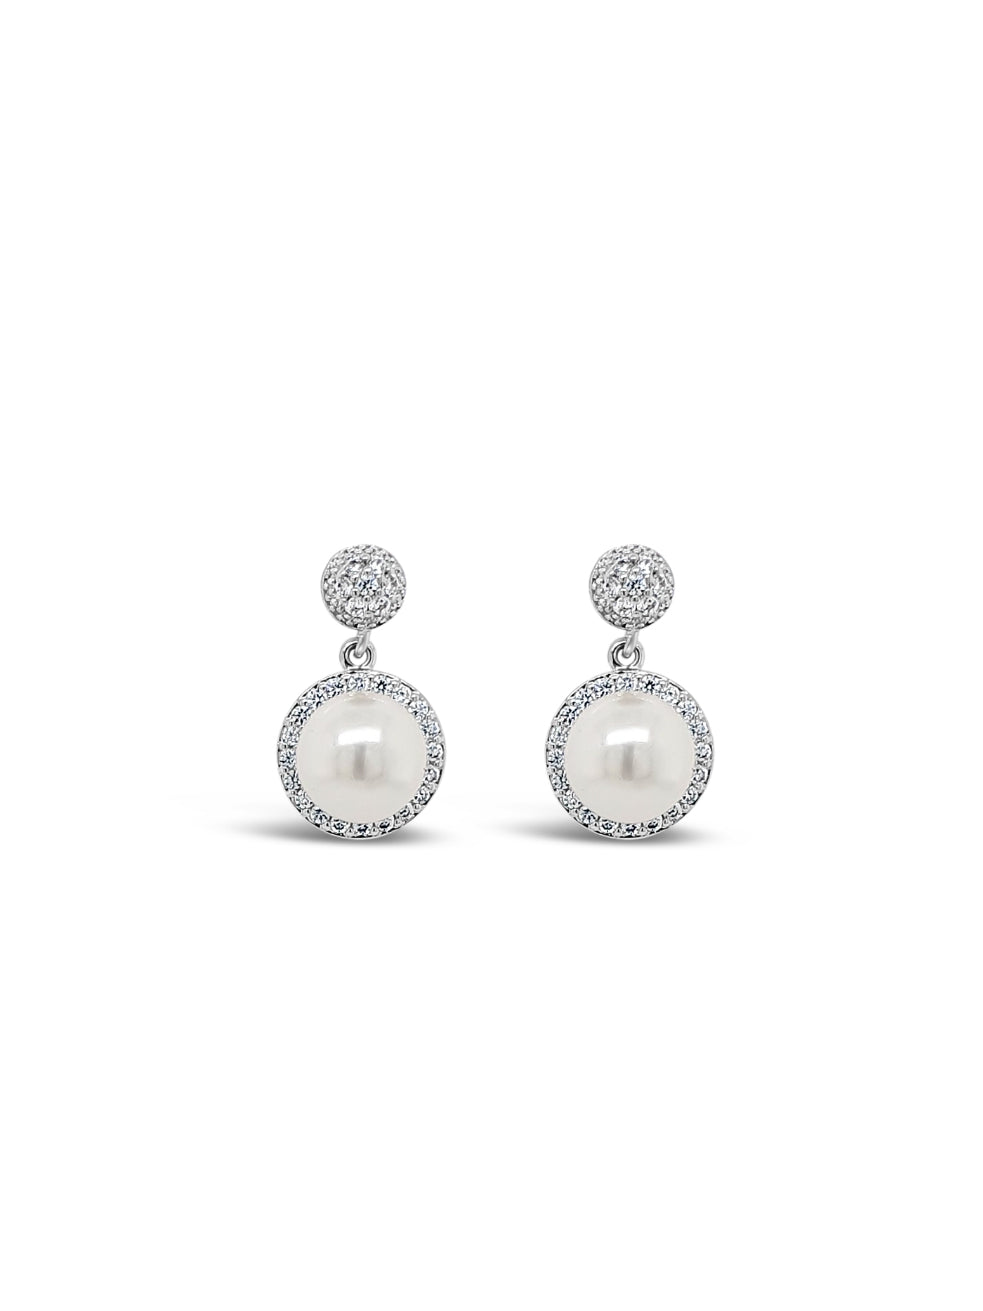 Silver Plated Pearl and Crystal Drop Earrings